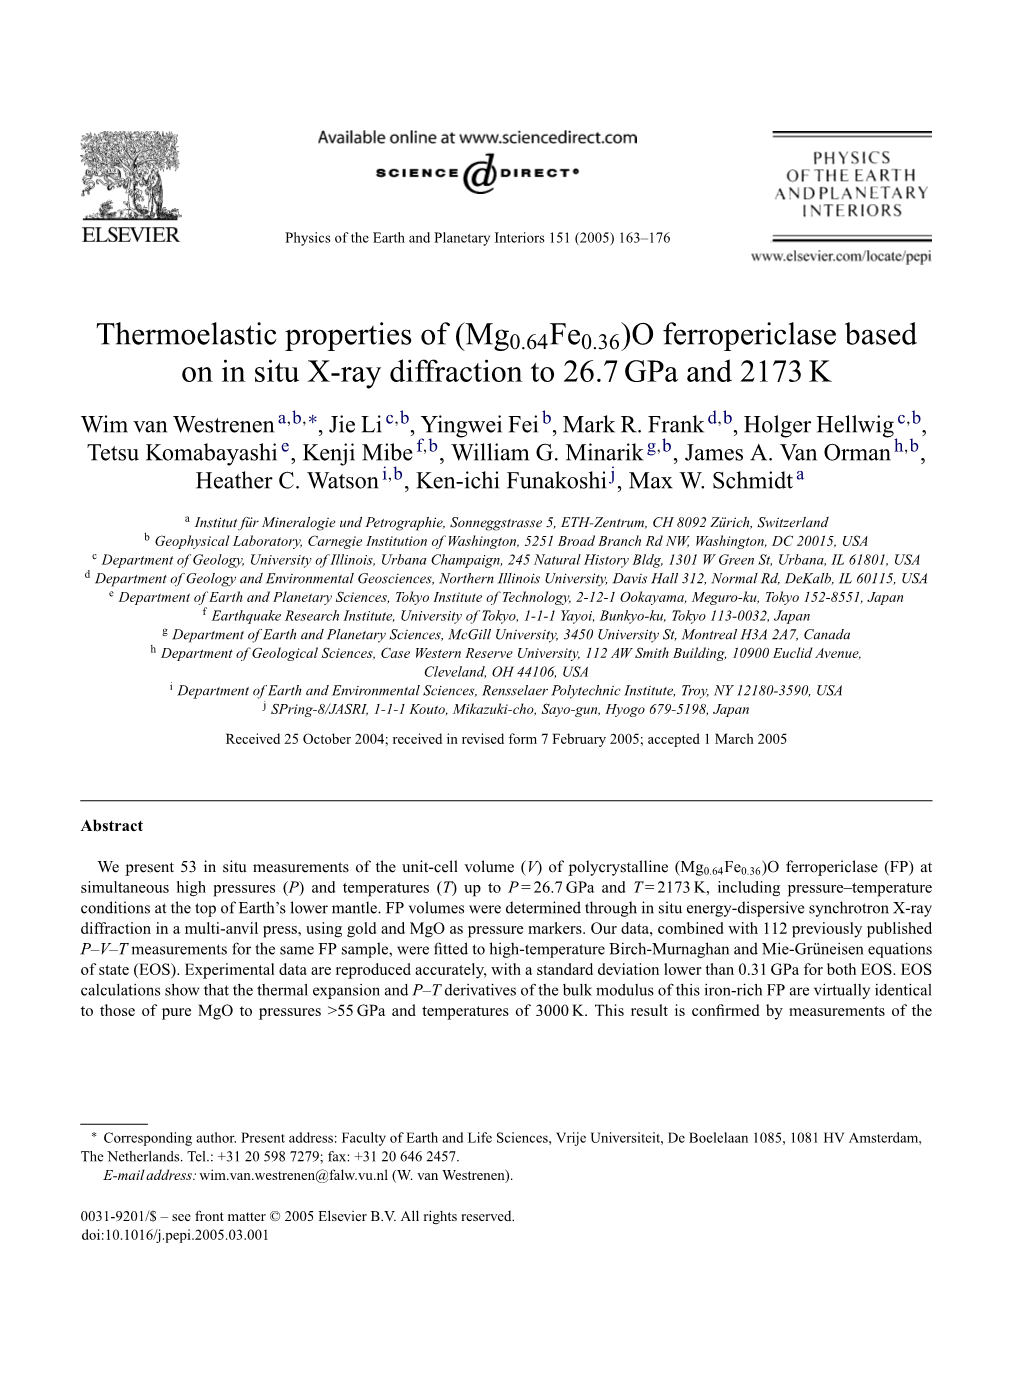 Thermoelastic Properties of (Mg0.64Fe0.36)O Ferropericlase Based on in Situ X-Ray Diffraction to 26.7 Gpa and 2173 K